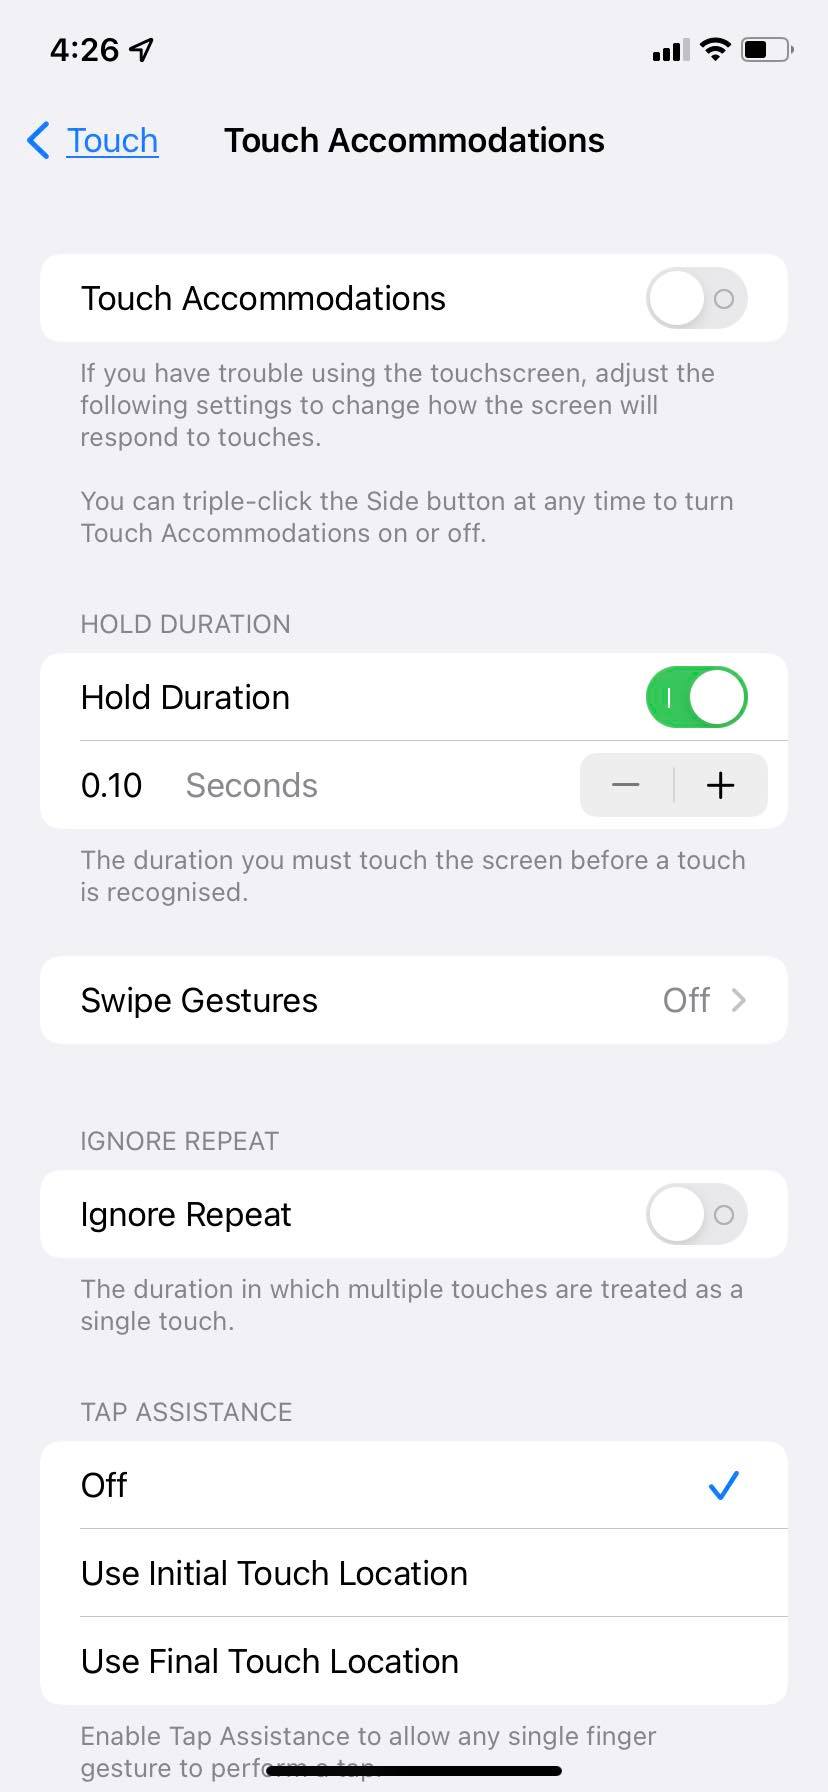 Screenshot of Touch Accommodations menu settings showing hold duration options